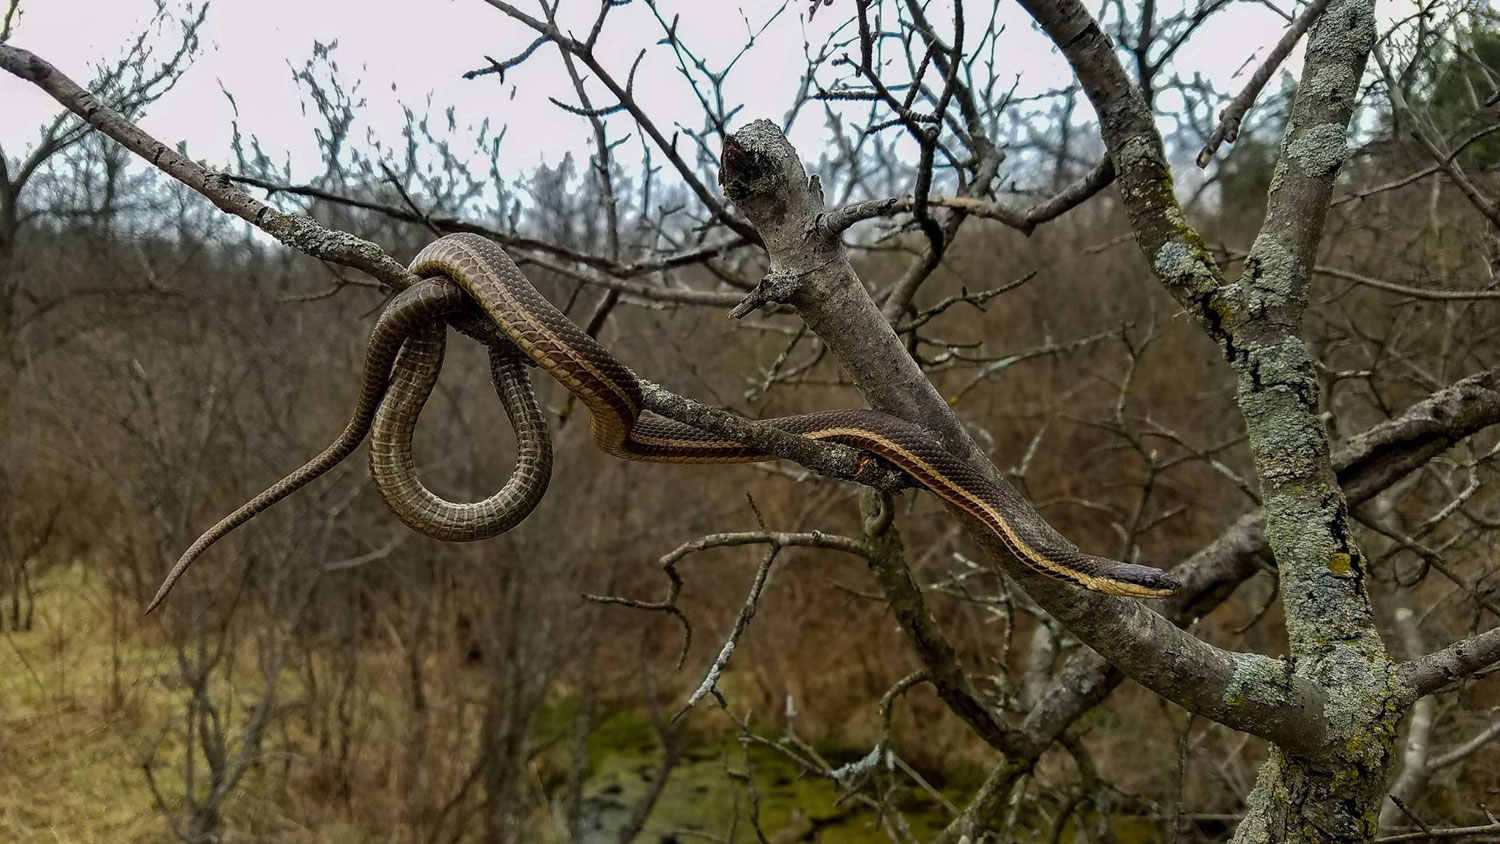 Queen snake draped over tree branches